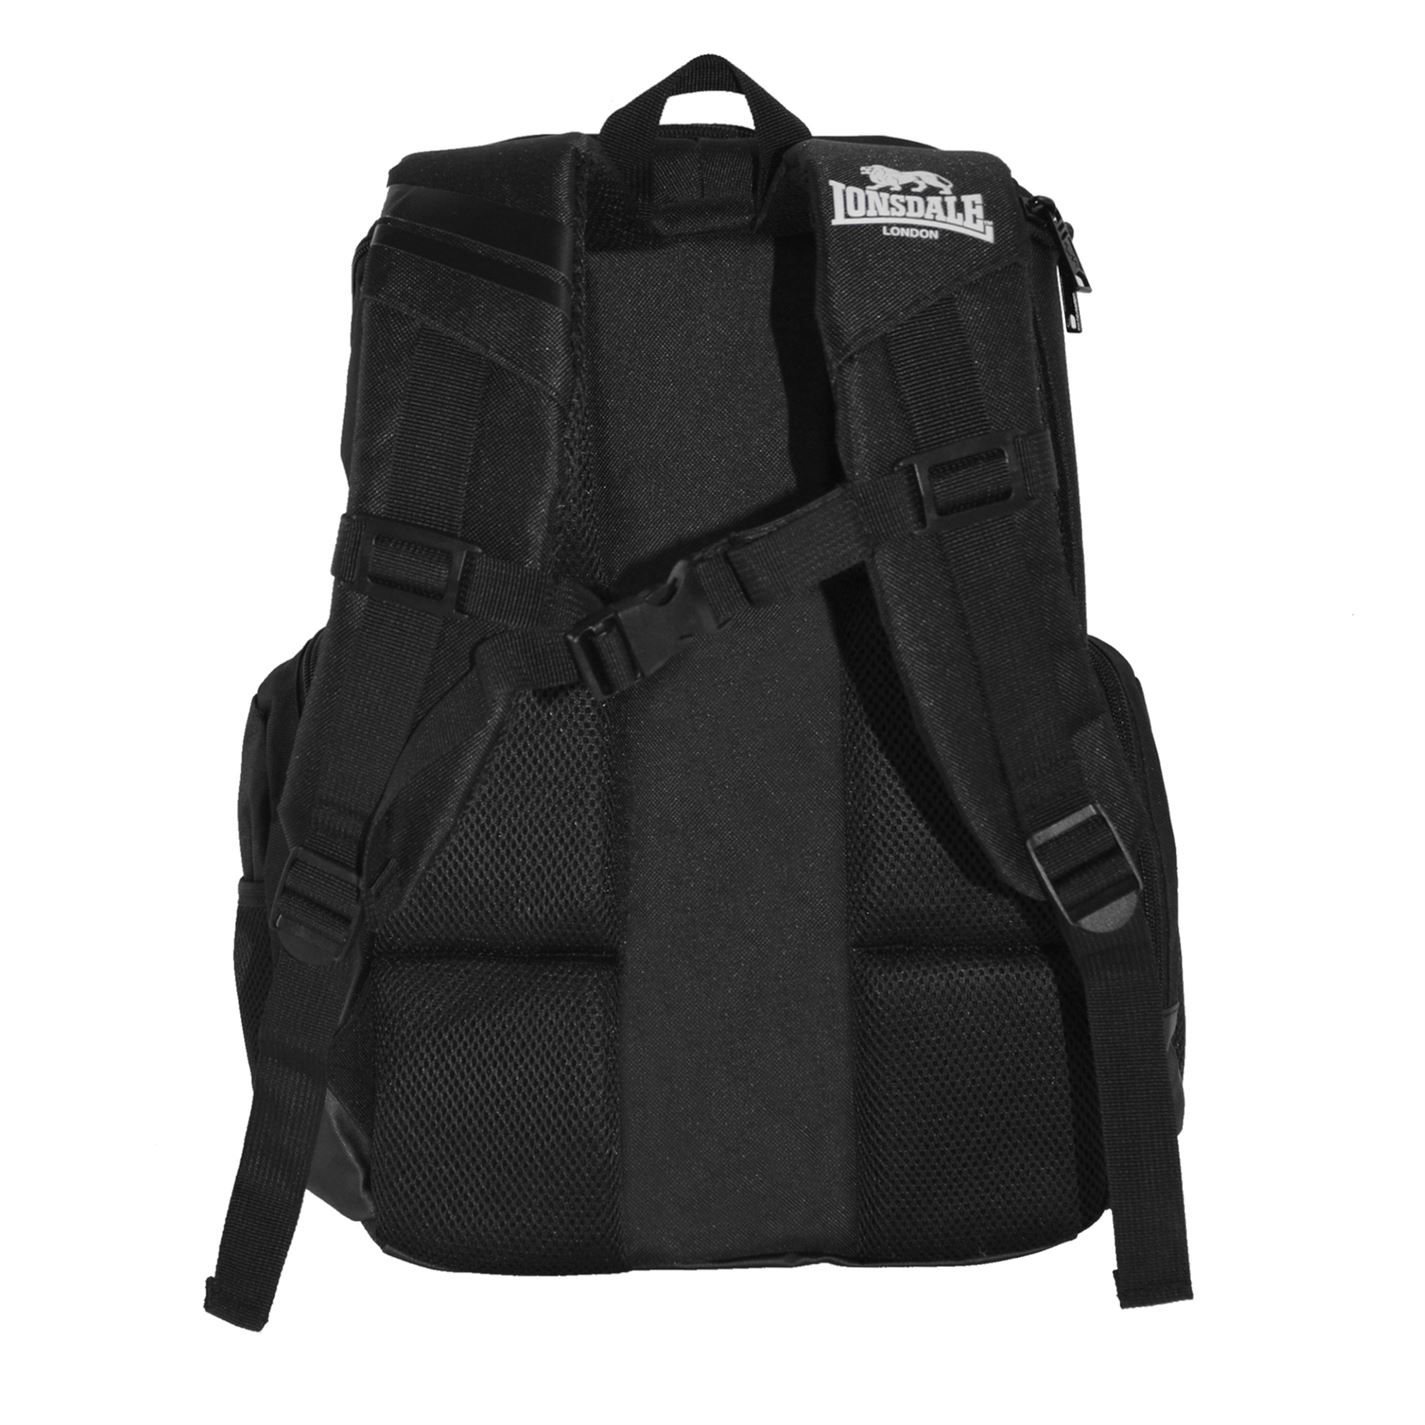 <strong>Lonsdale Niagara Backpack</strong><br><br> Great for travelling this Lonsdale Niagara Backpack features eight pockets one of which in a phone pocket and another inside, offering plenty of room for storing your goods. This Lonsdale backpack includes secure, adjustable and padded straps to ensure your comfort and security.<br>> Lonsdale backpack<br>> Eight pockets including one interior and phone pocket<br>> Headphone port to top pocket<br>> Padded, adjustable straps<br>> Lonsdale branding<br>> W34 x D19 x H38cm